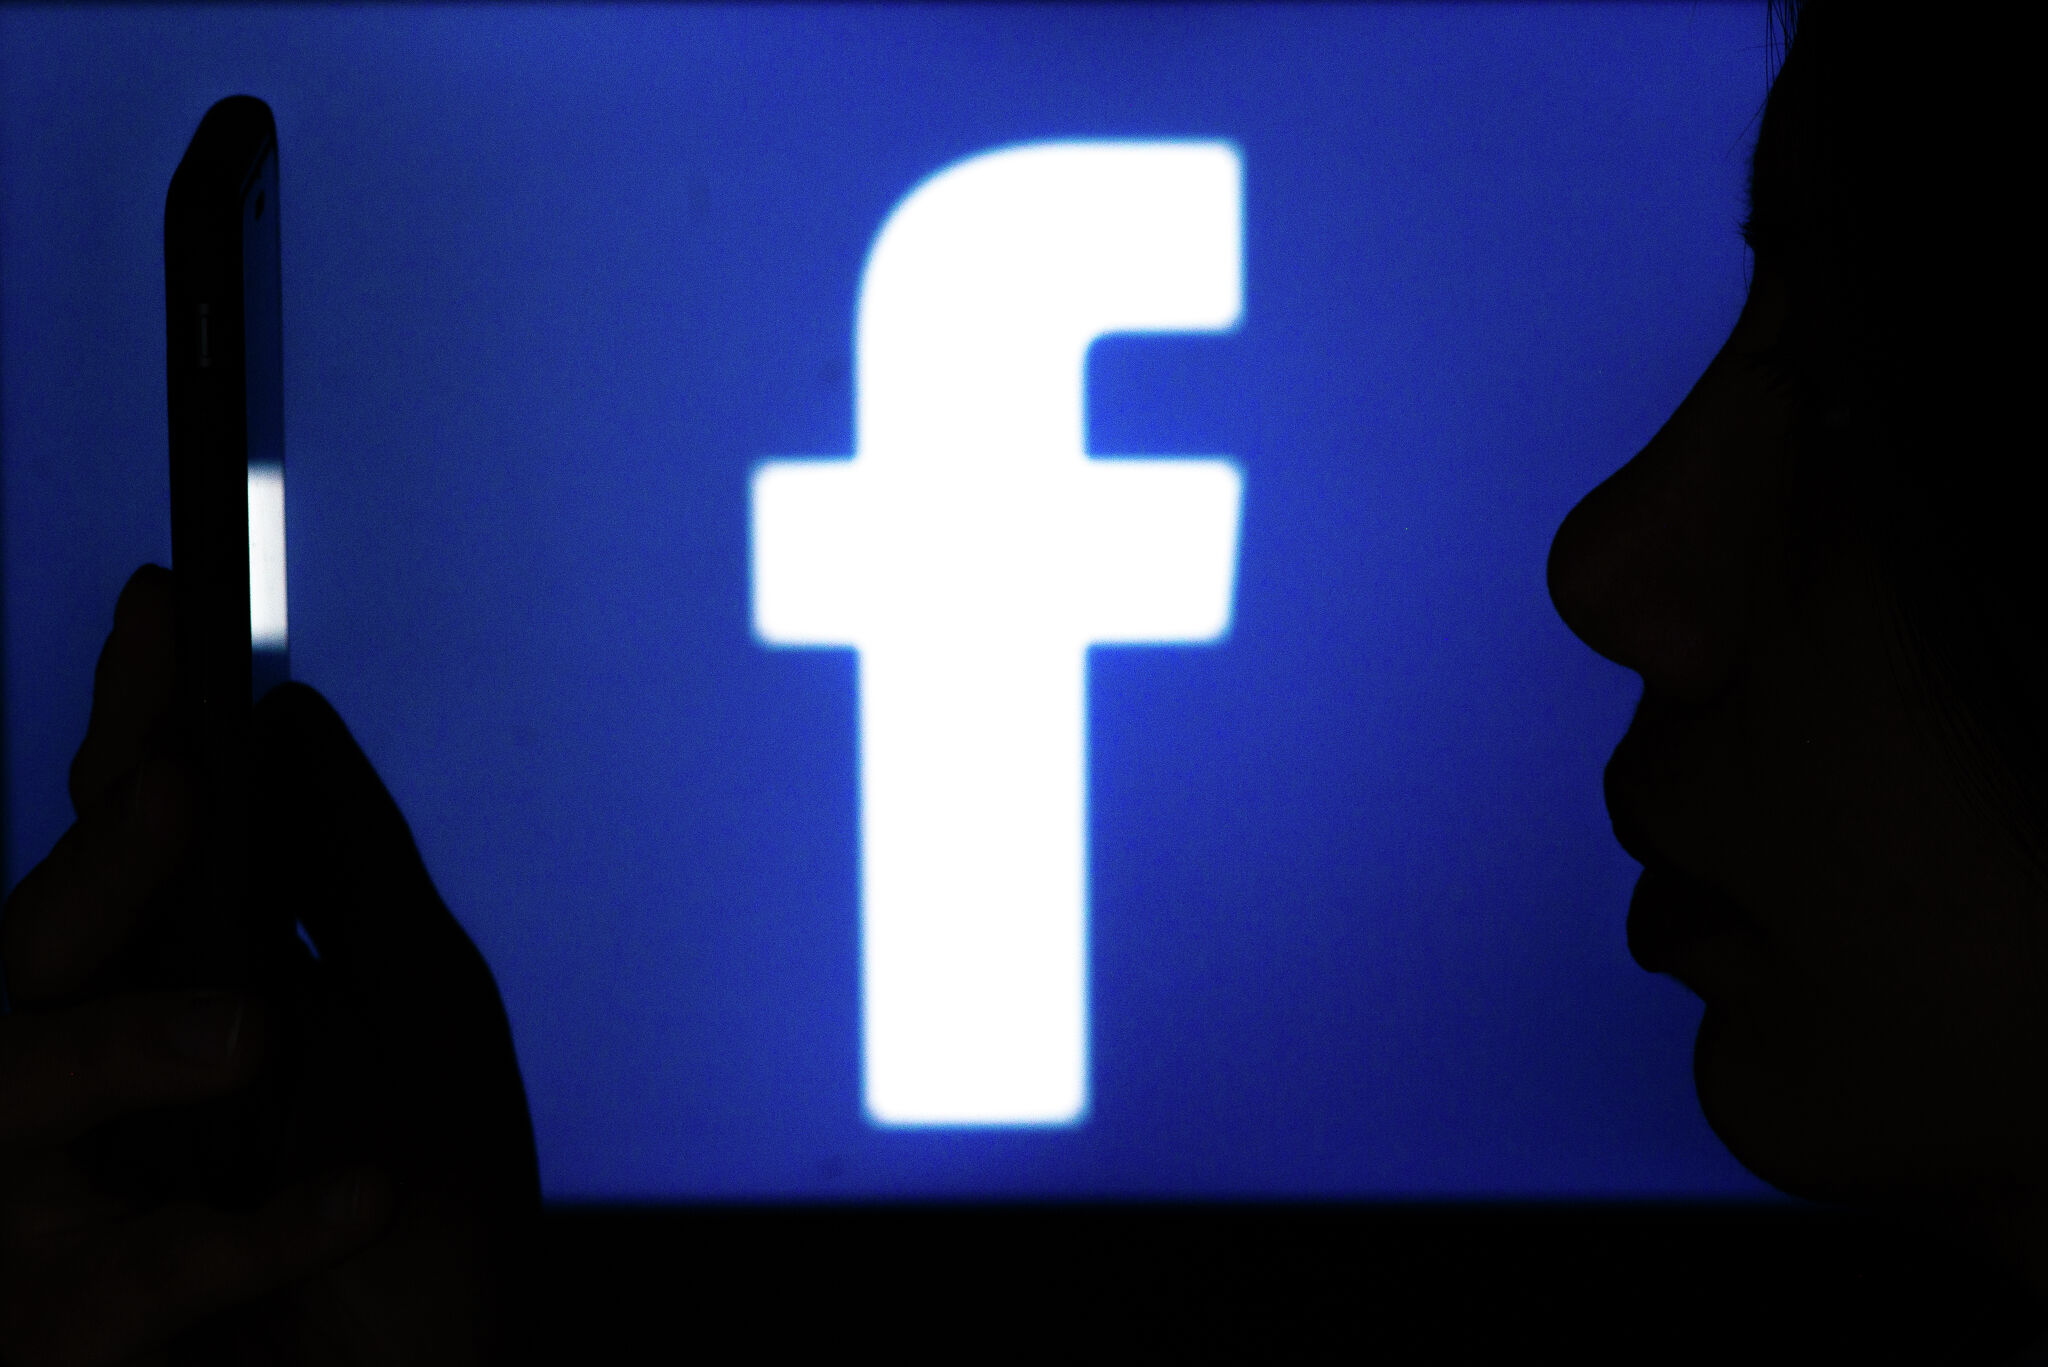 Facebook settlement How to claim your share of the 725 million